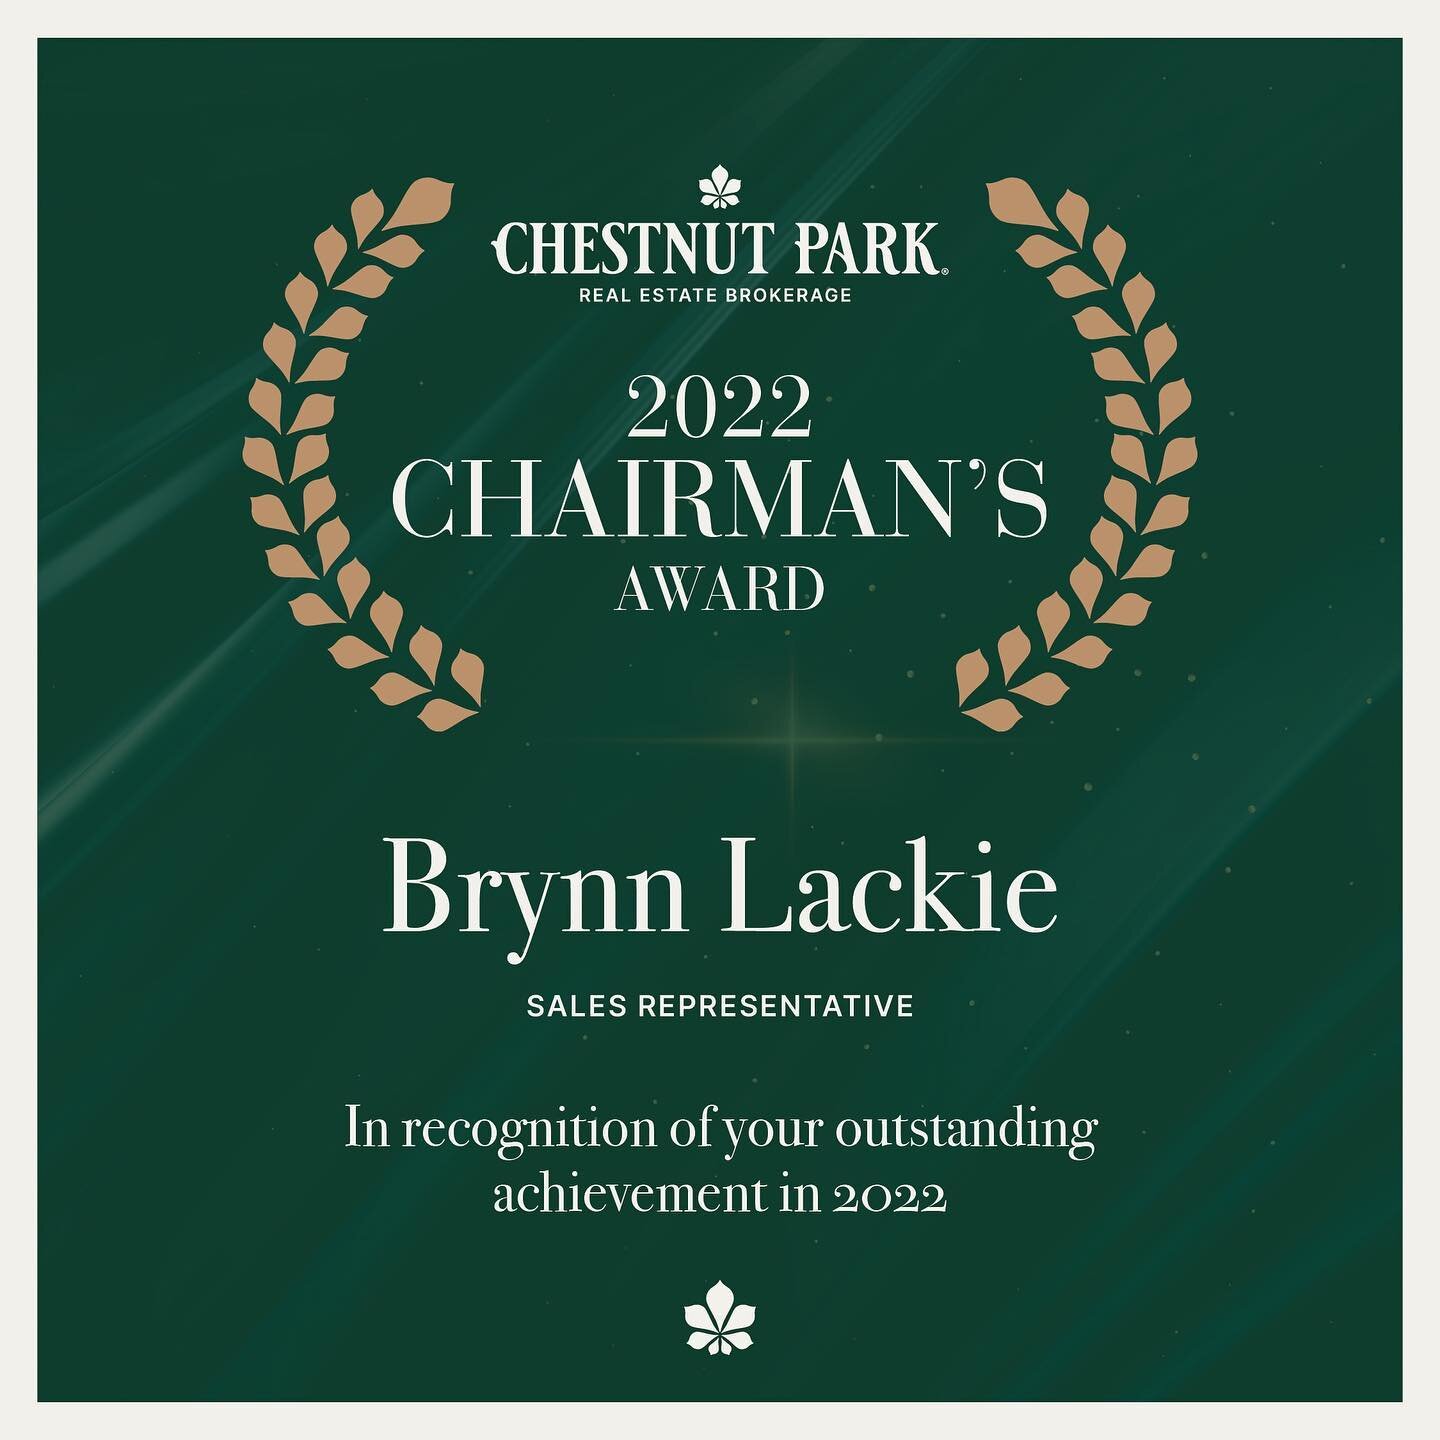 ✨ G R A T E F U L ✨ and excited for another year of adventures in real estate with the very best in the biz @chestnutparkhomes

&bull;

&bull;

&bull;

#brynnlackierealestate #chestnutparkrealestate #womeninrealestate #torontolife #sellingtoronto #to